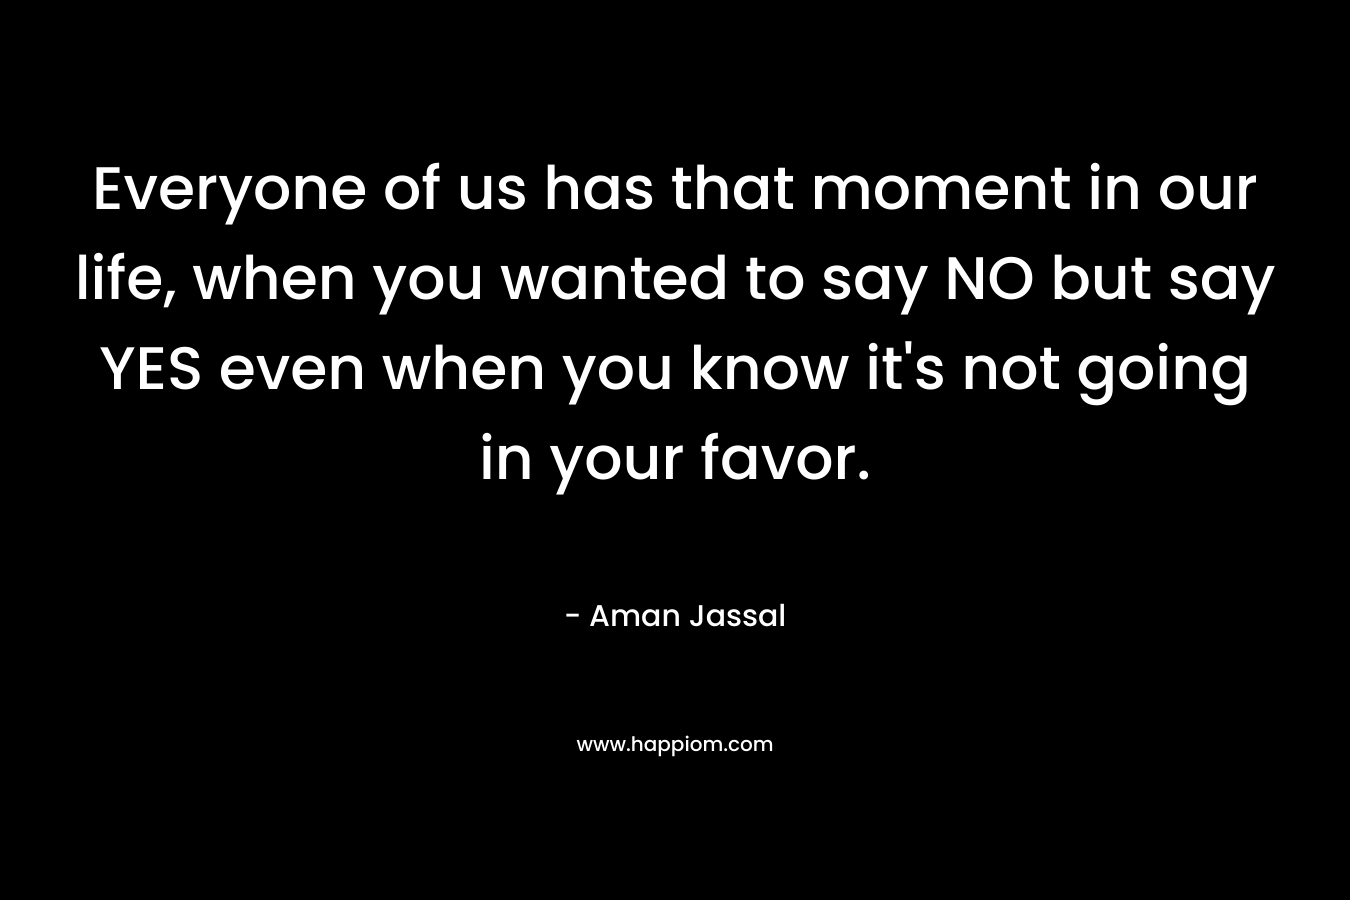 Everyone of us has that moment in our life, when you wanted to say NO but say YES even when you know it's not going in your favor.